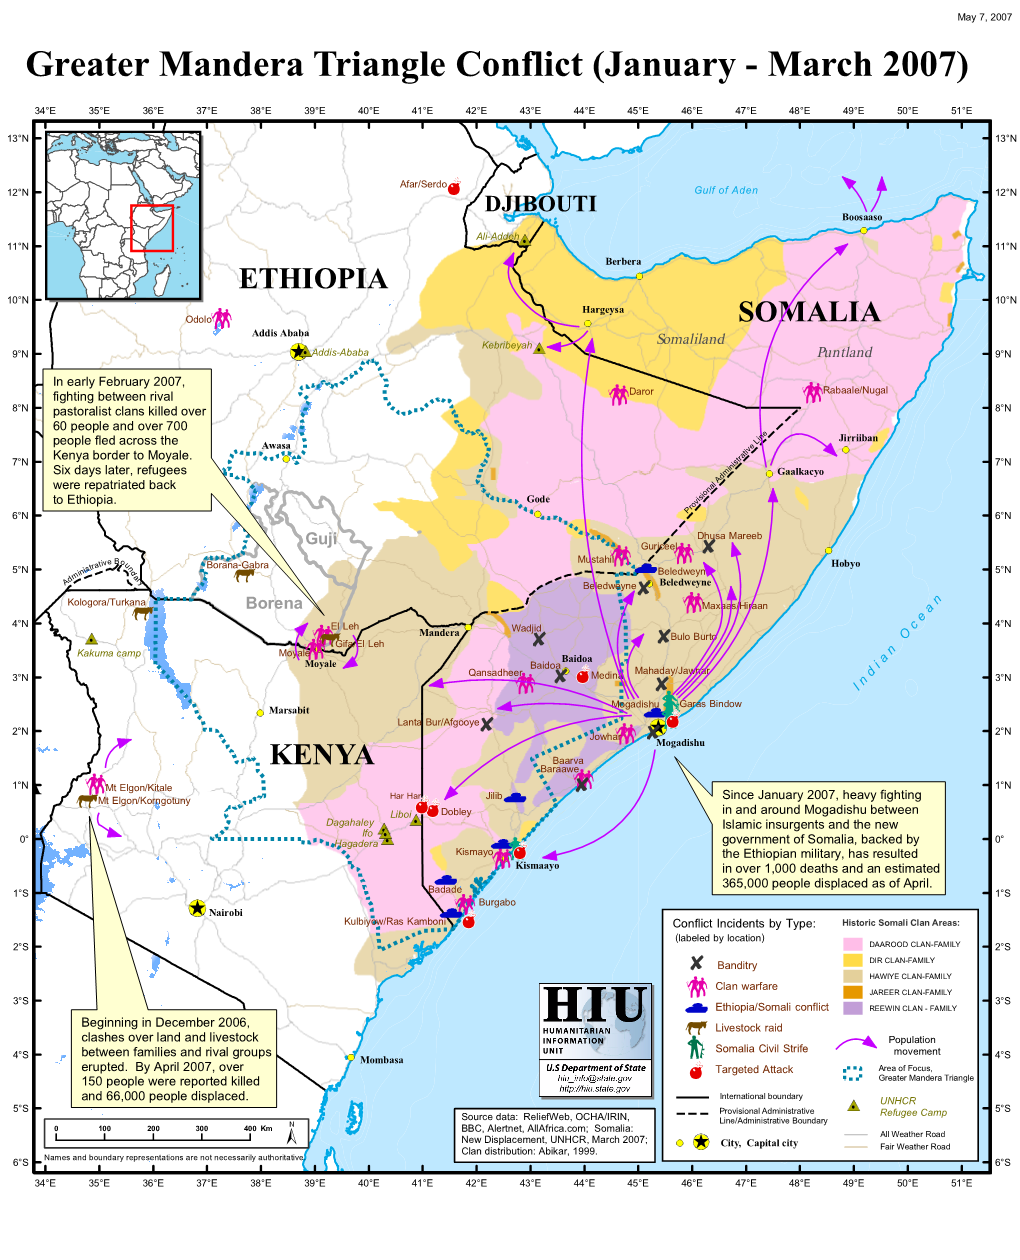 Greater Mandera Triangle Conflict (January - March 2007)